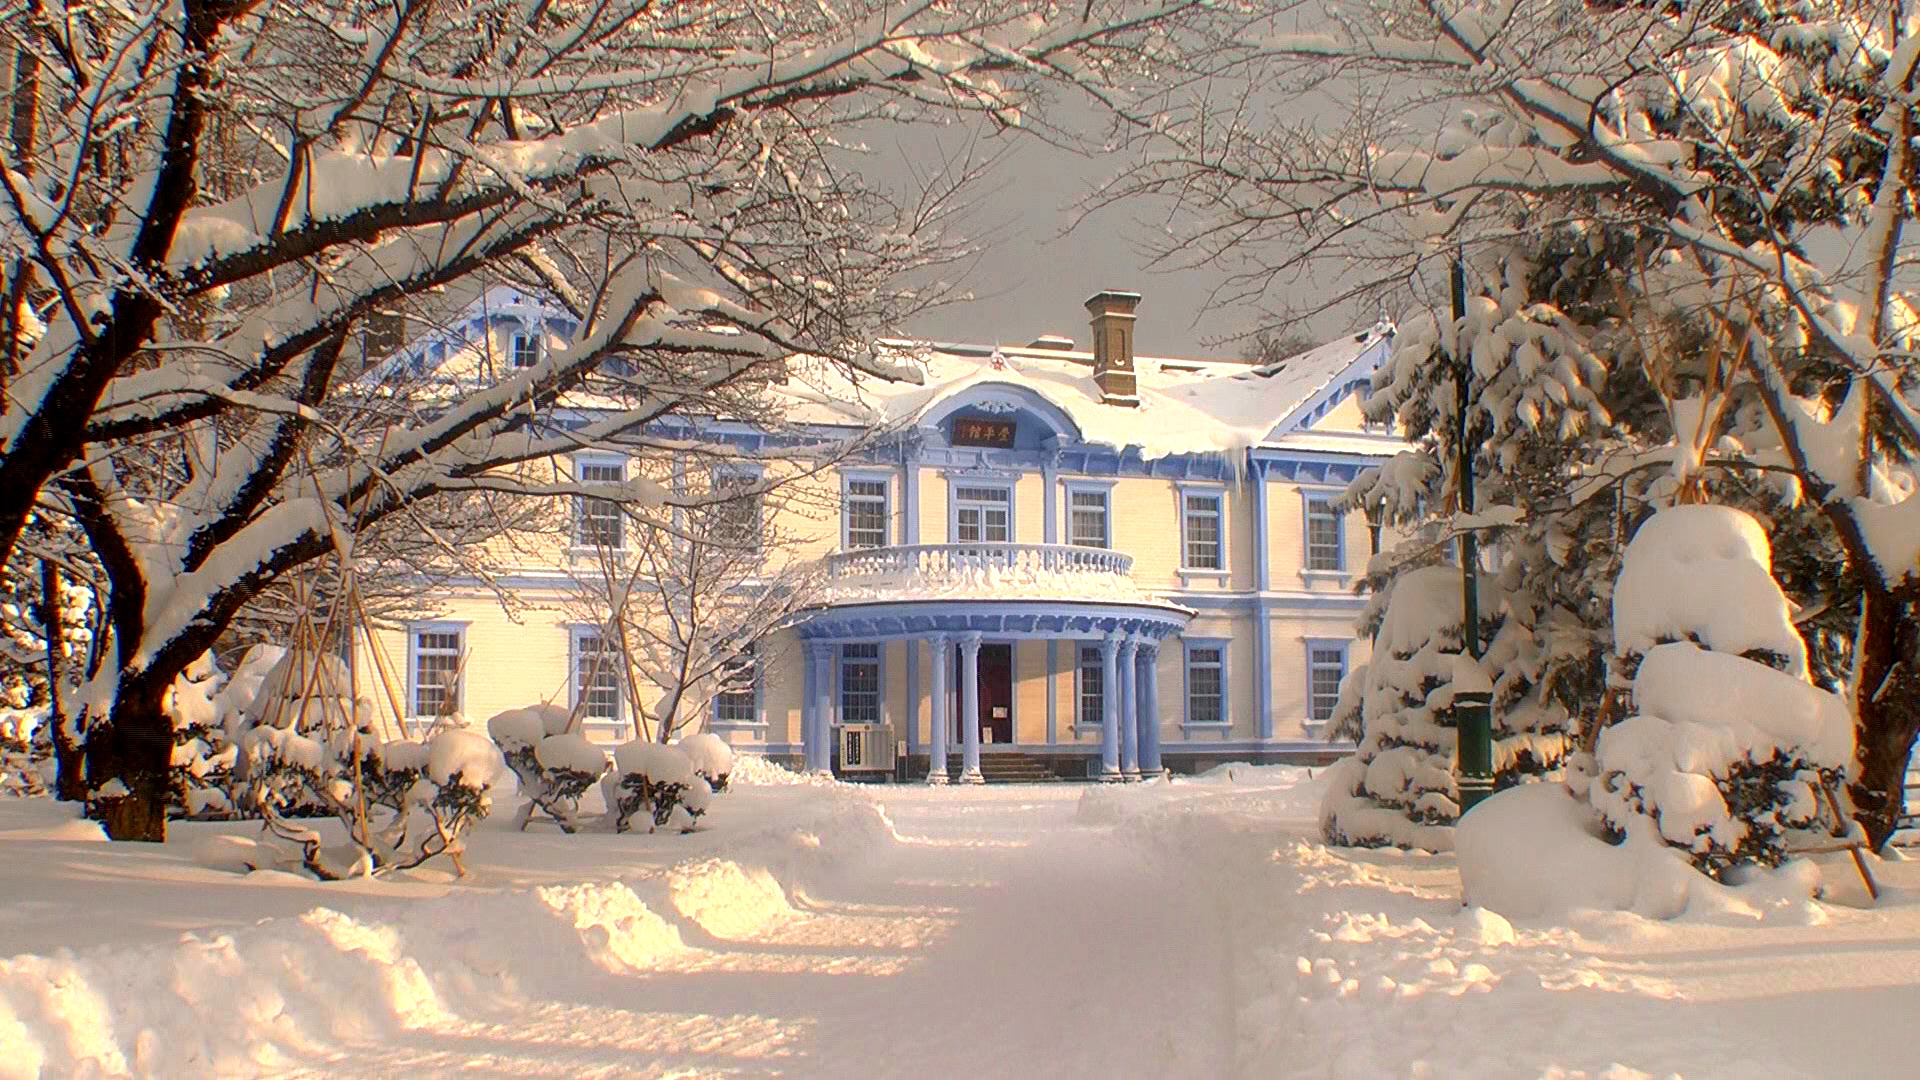 House In Winter Hd Wallpaper Background Image 1920x1080 Id770901